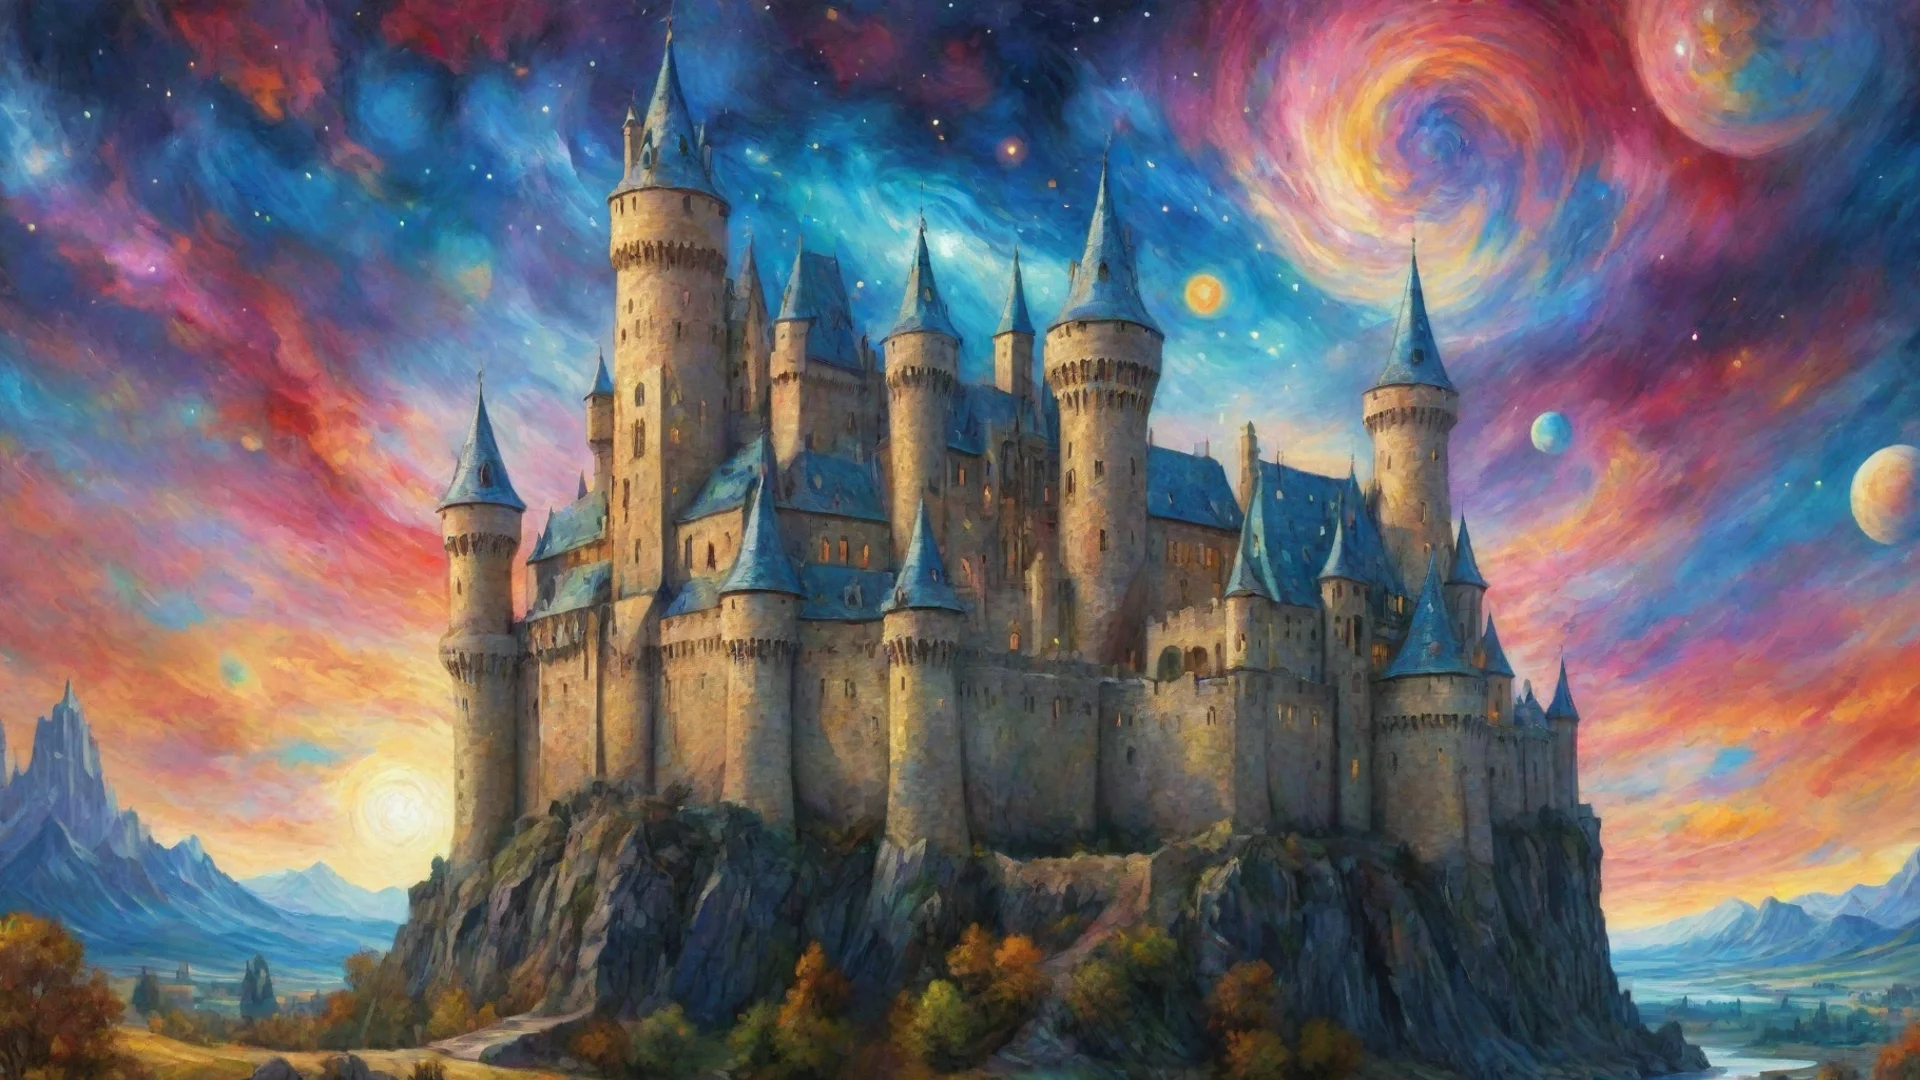 aiartstation art epic castle with colorful artistic sky planets van gogh style detailed hd asthetic castle confident engaging wow 3 wide